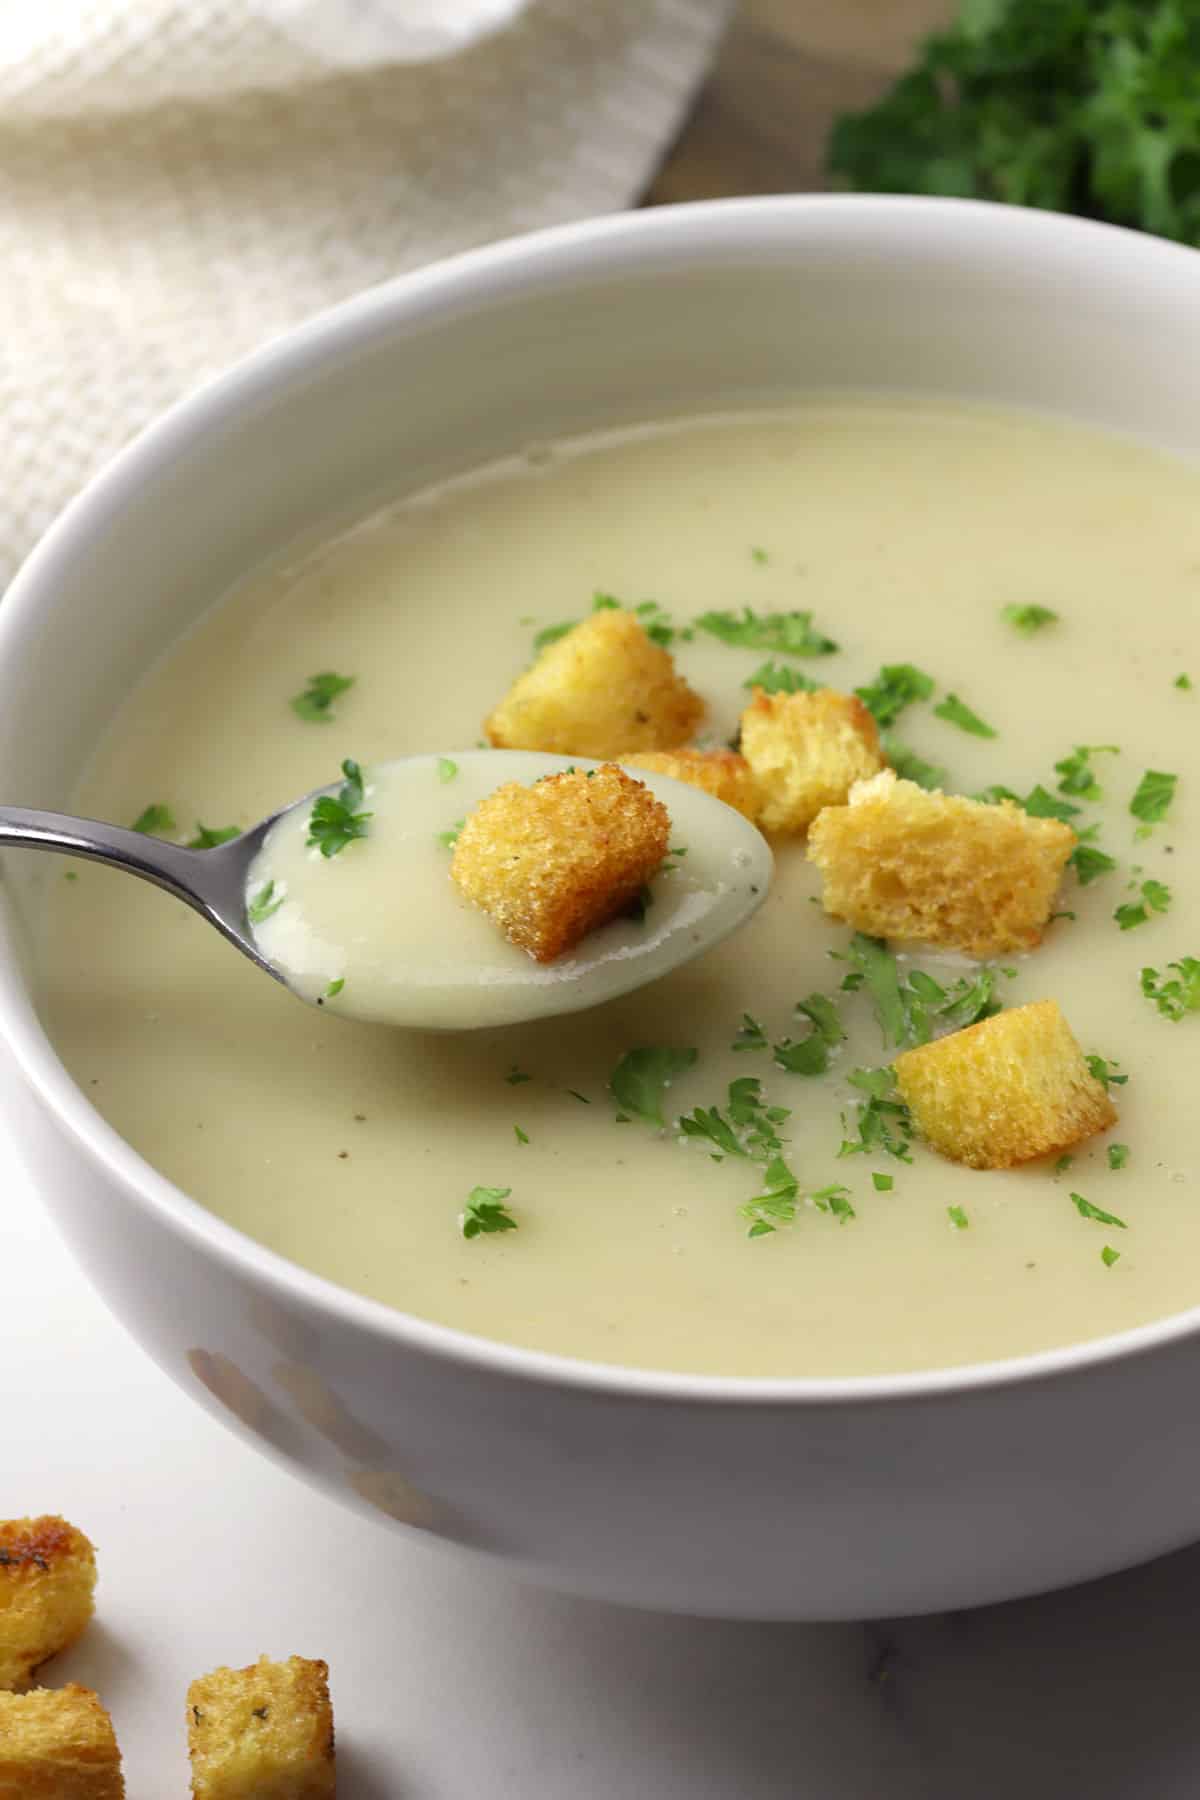 A metal spoon scooping creamy potato soup from a white bowl.